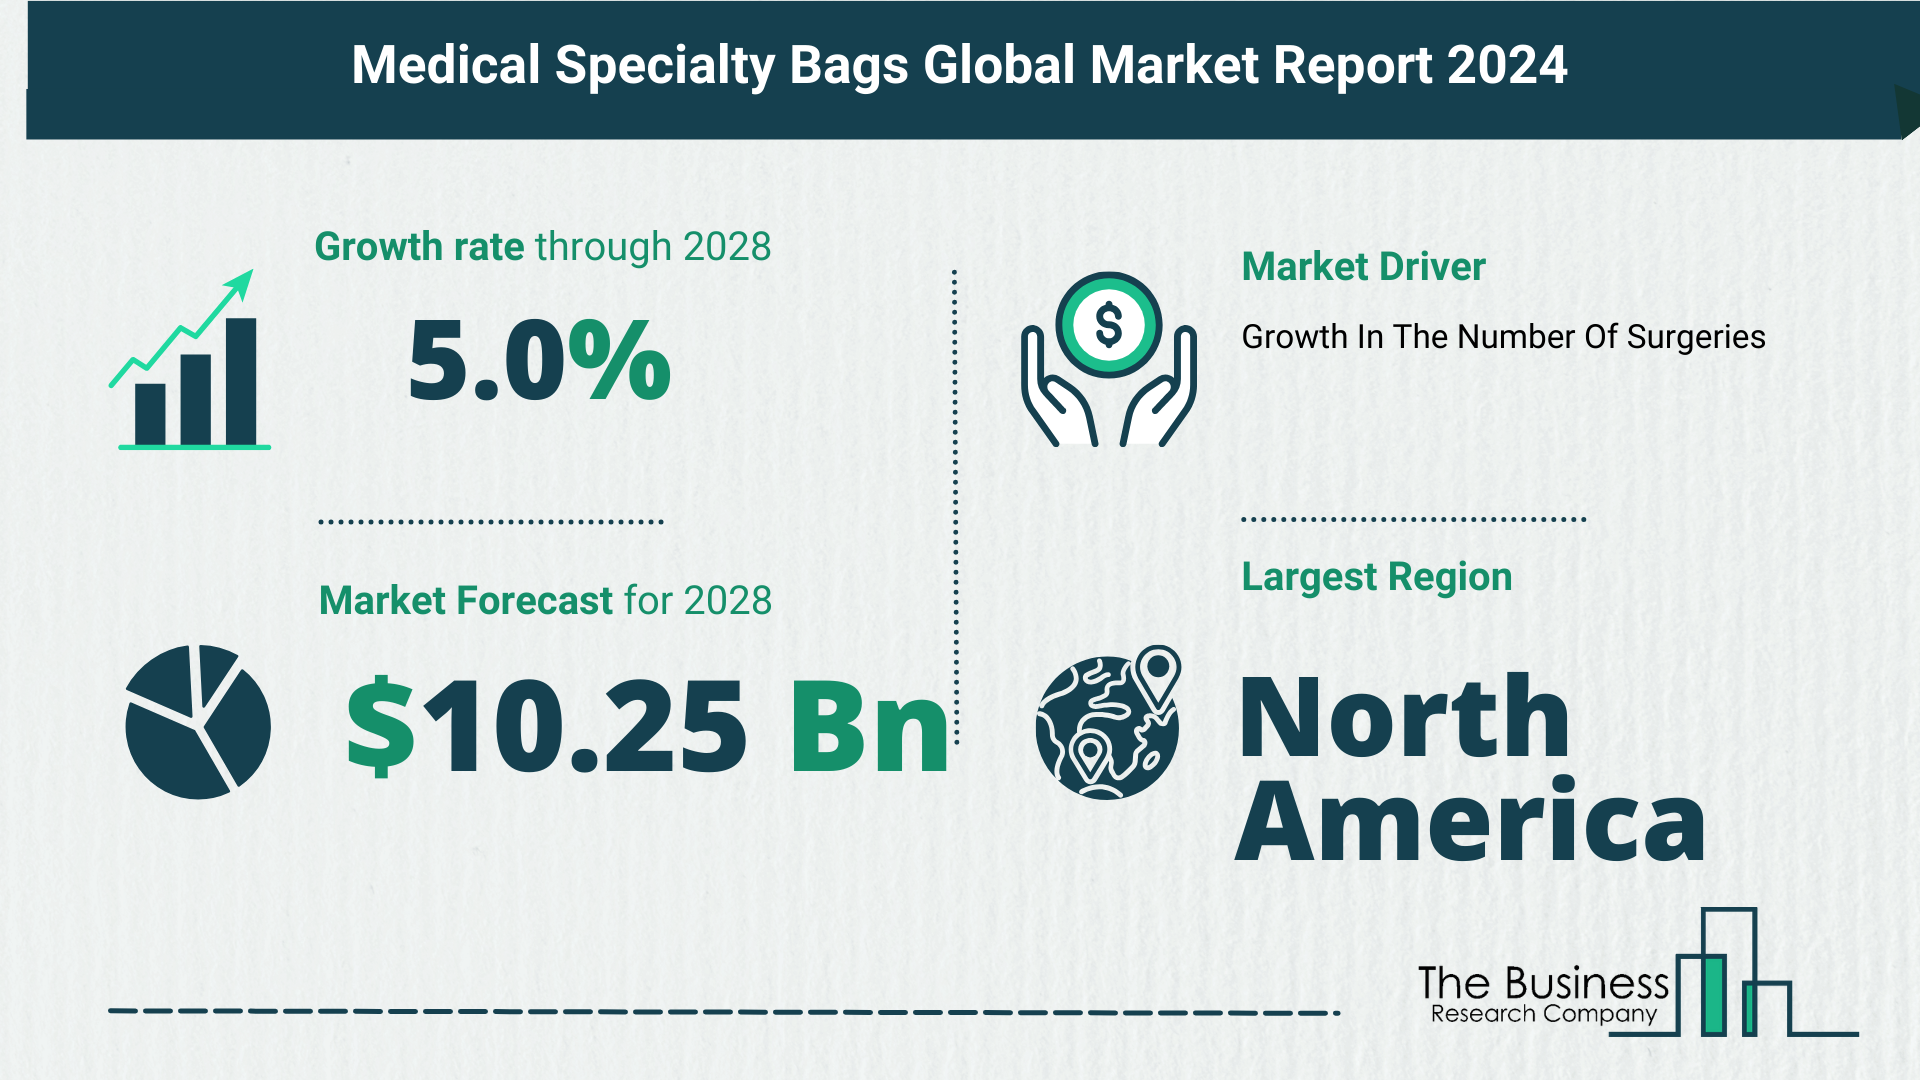 Top 5 Insights From The Medical Specialty Bags Market Report 2024